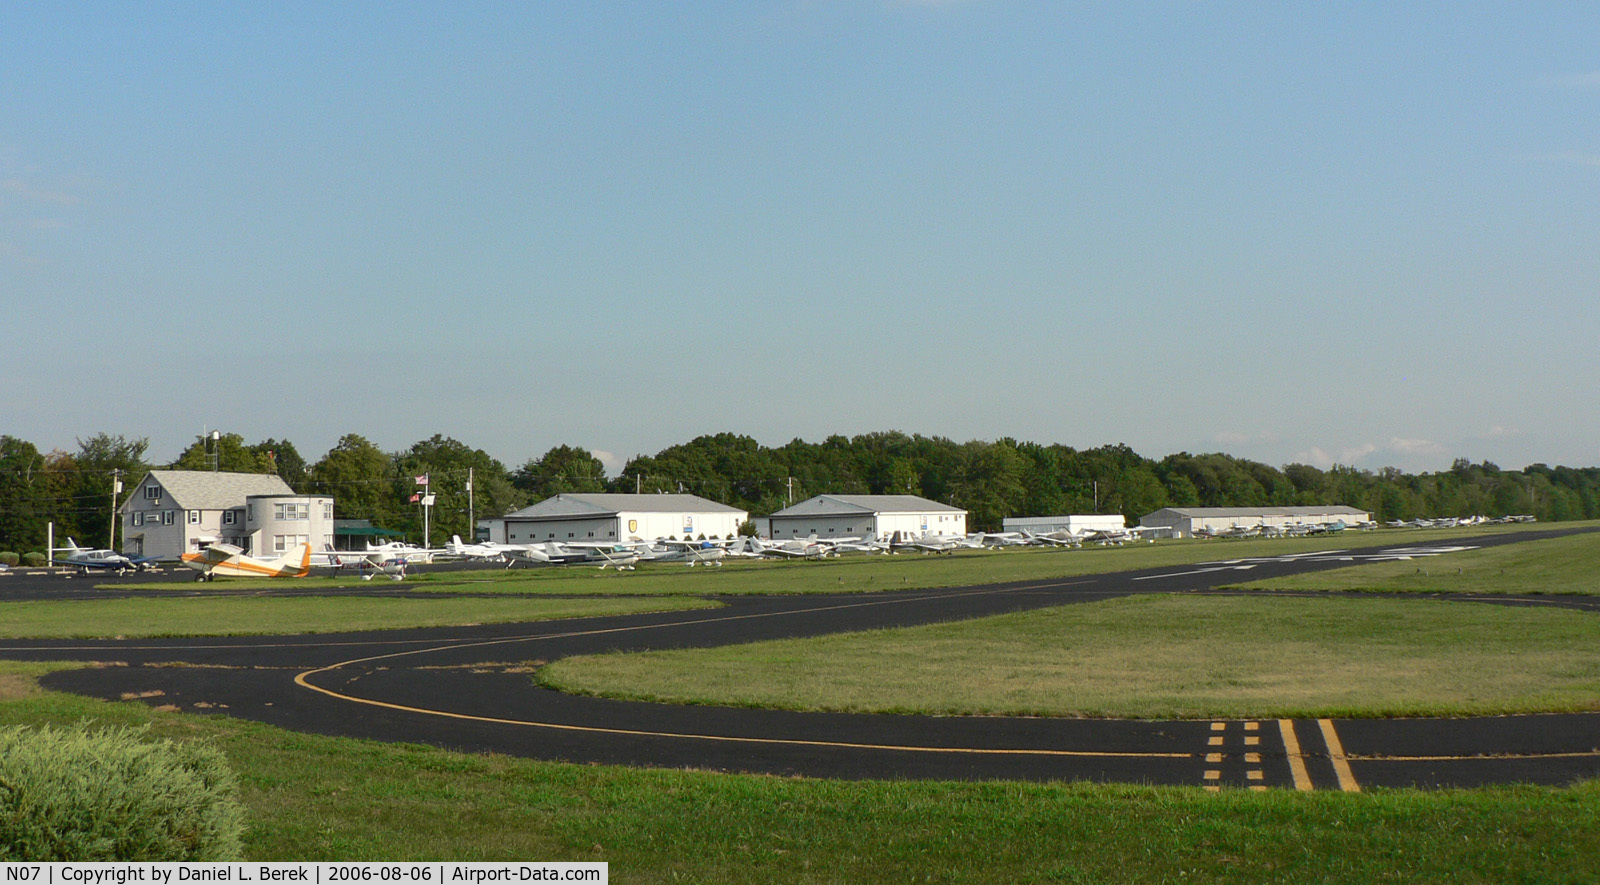 Lincoln Park Airport (N07) - This view from the north gives a panorama of the terminal and aprons at Lincoln Park.